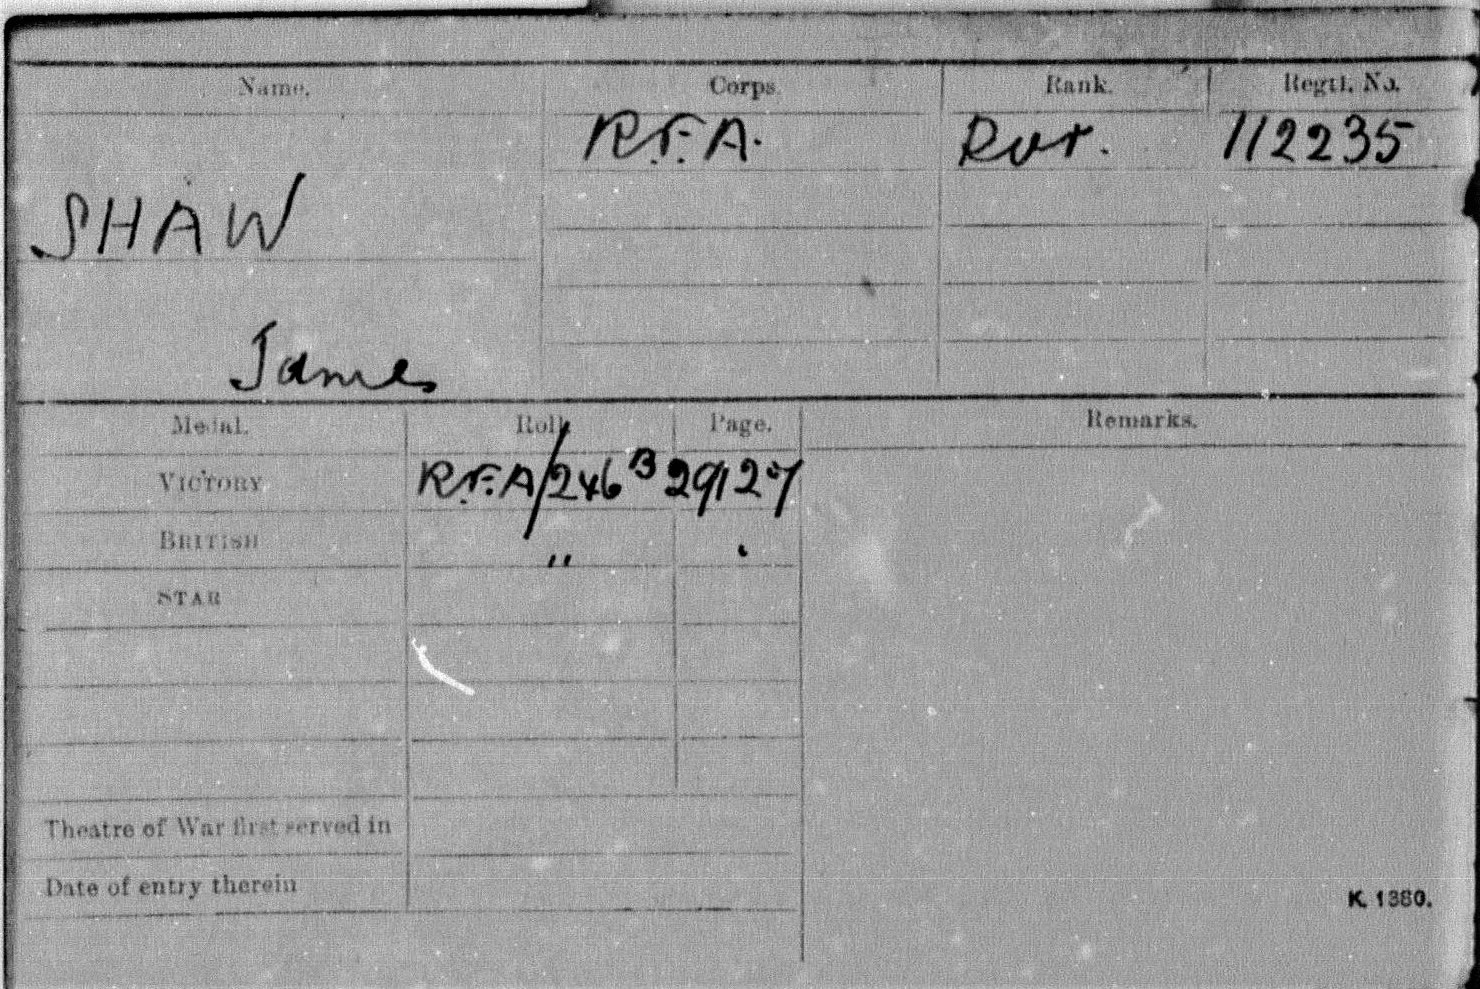 Private James Shaw's Medal Card in the Military records on TheGenealogist